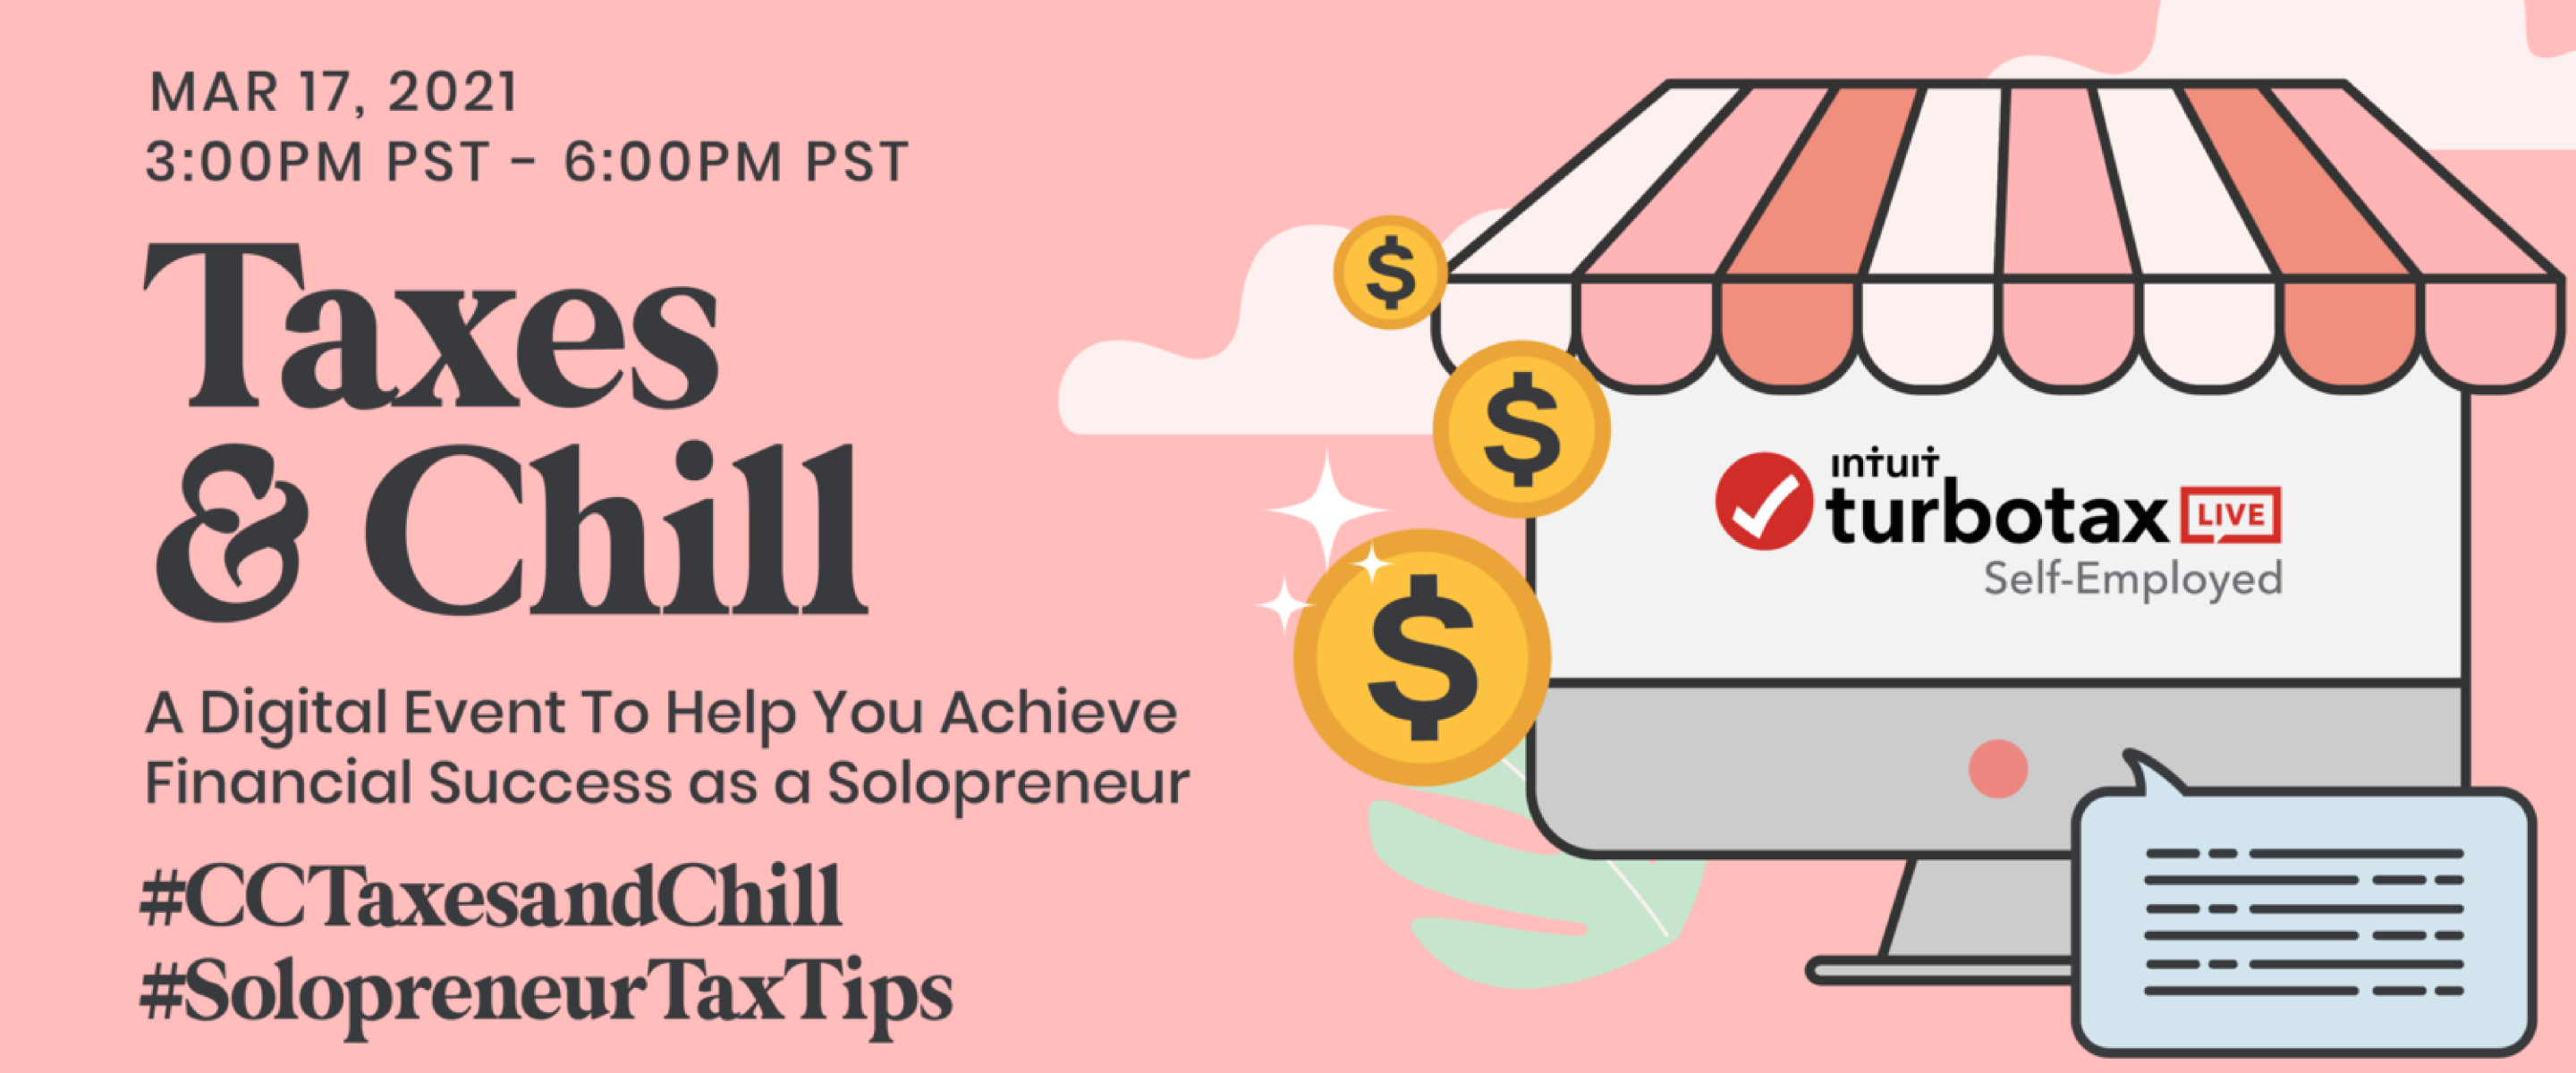 Taxes and Chill: A Digital Event To Help You Achieve Financial Success as a Solopreneur